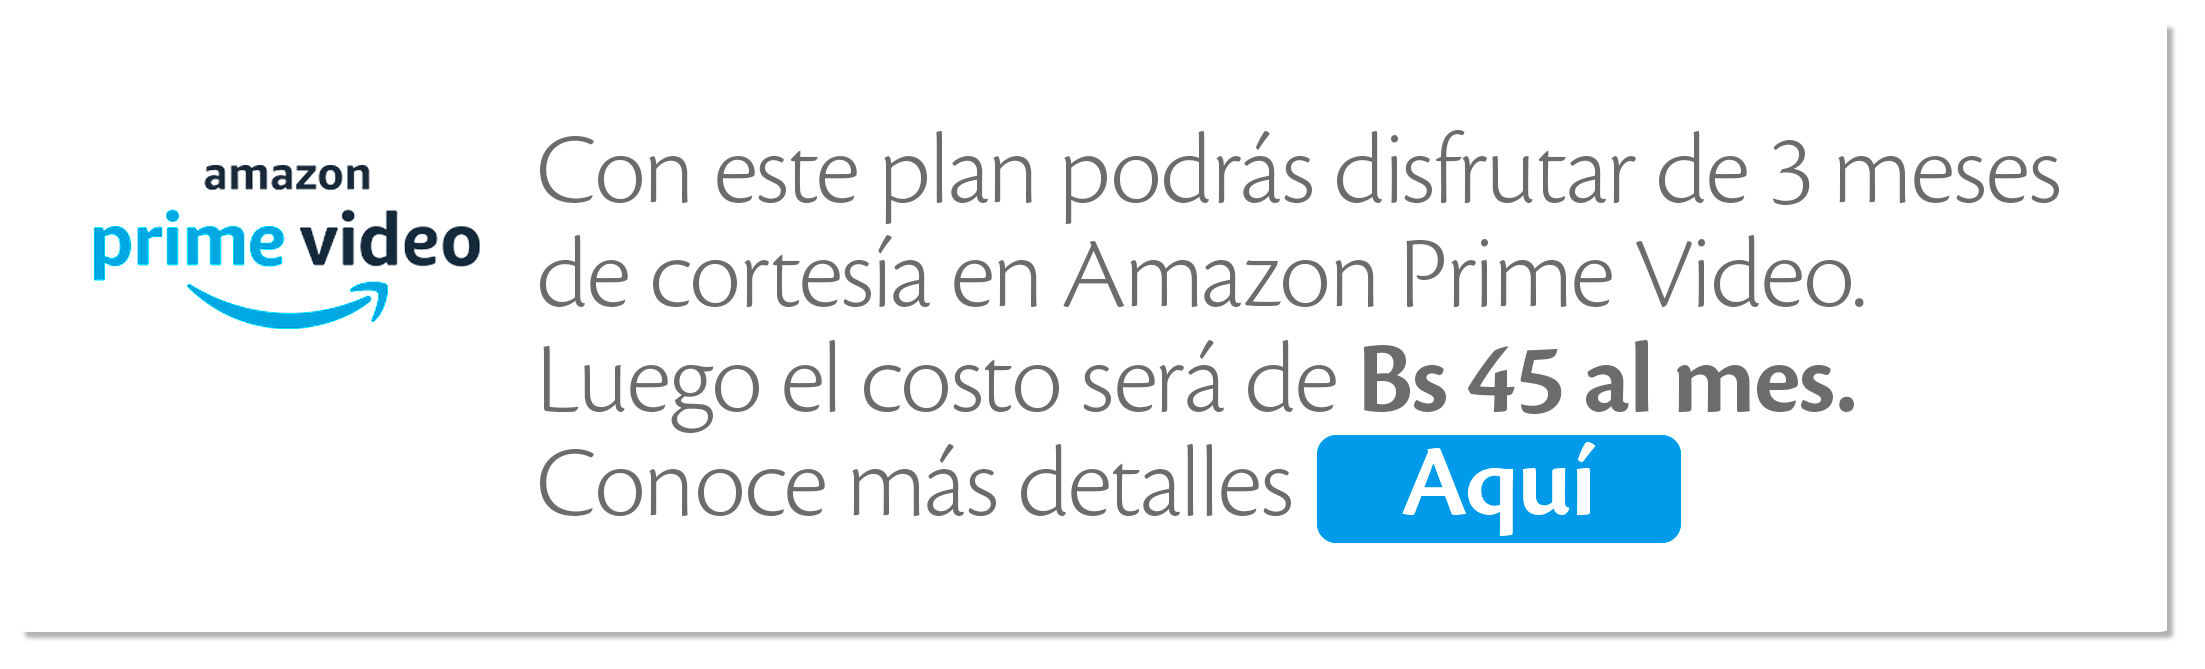 aw-activa_amazon_prime.png